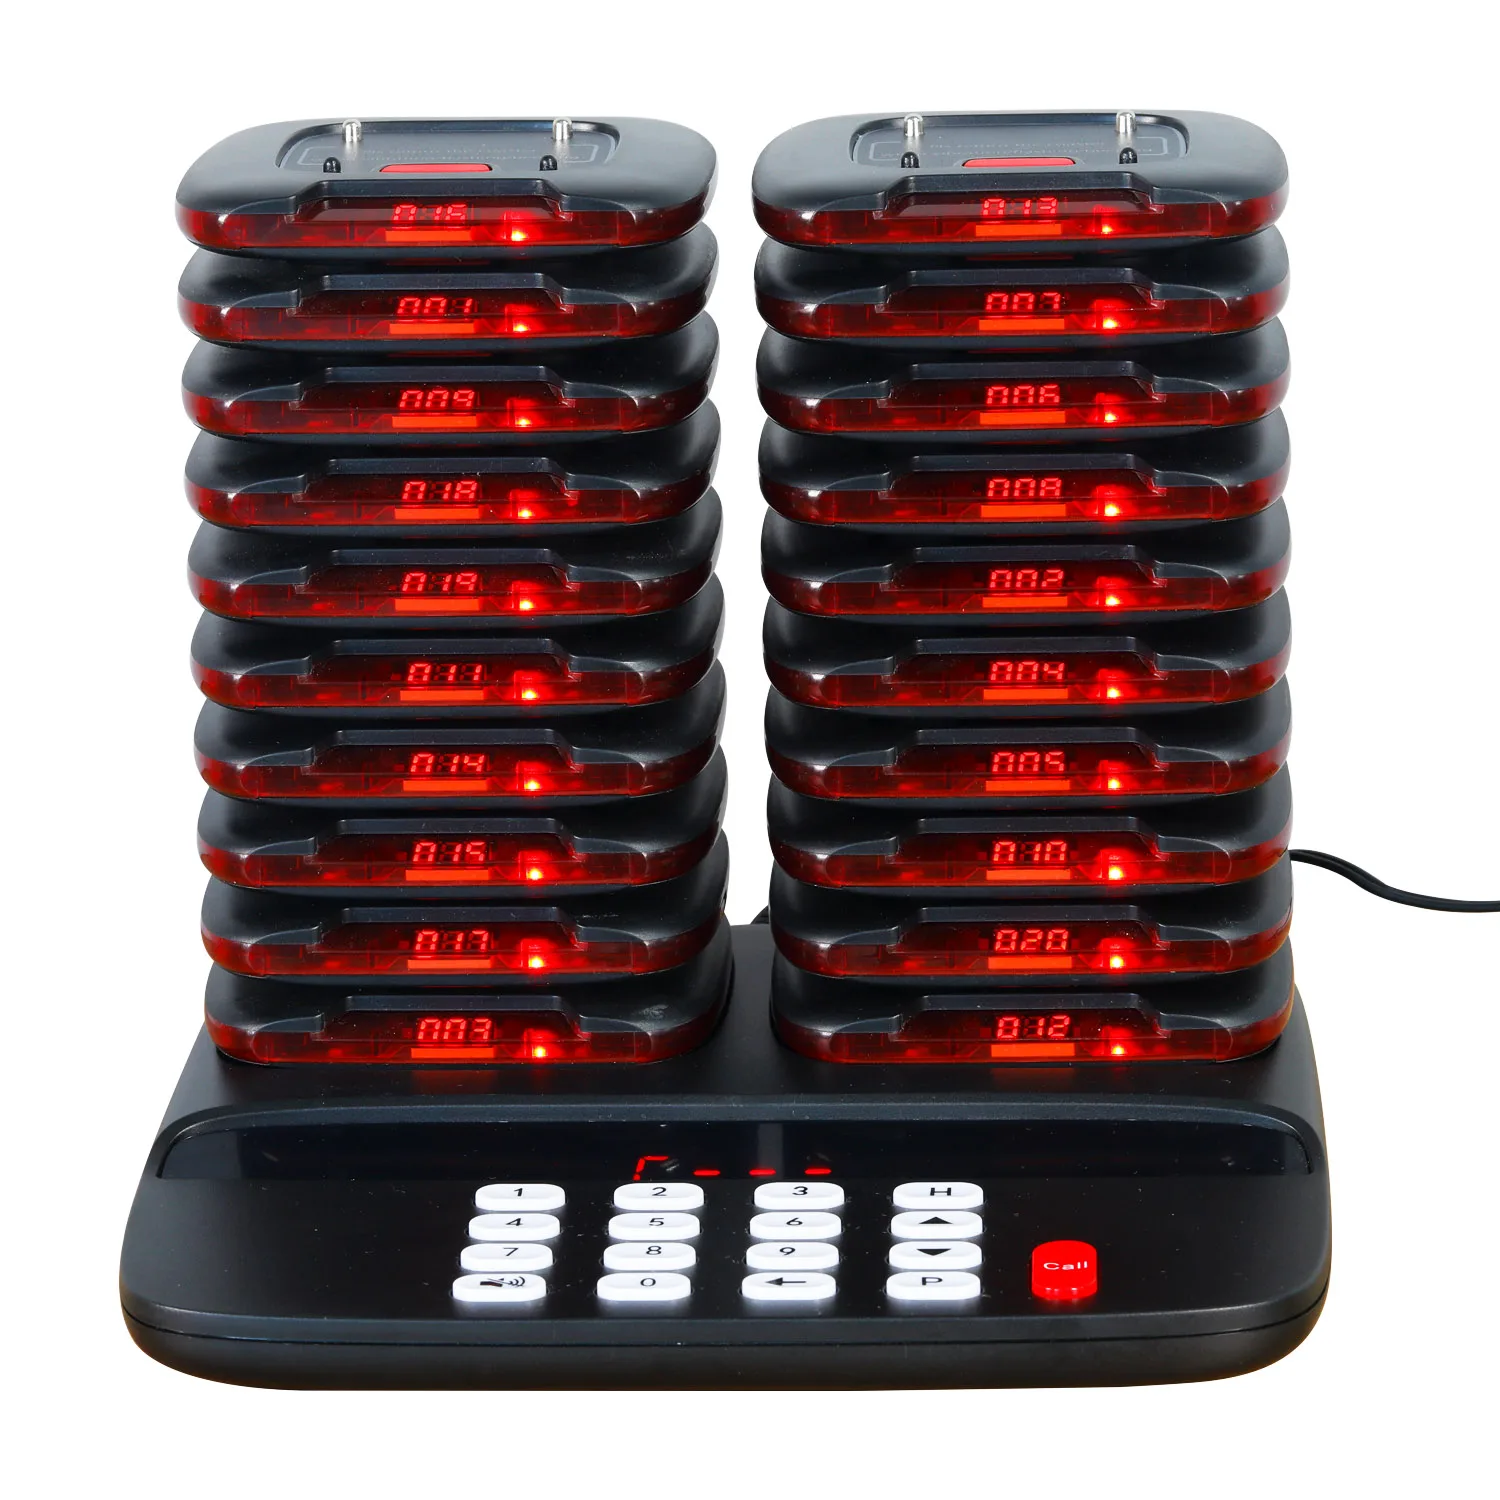 long standby time waterproof 1500 meters RF restaurant church vibration calling coaster pager system